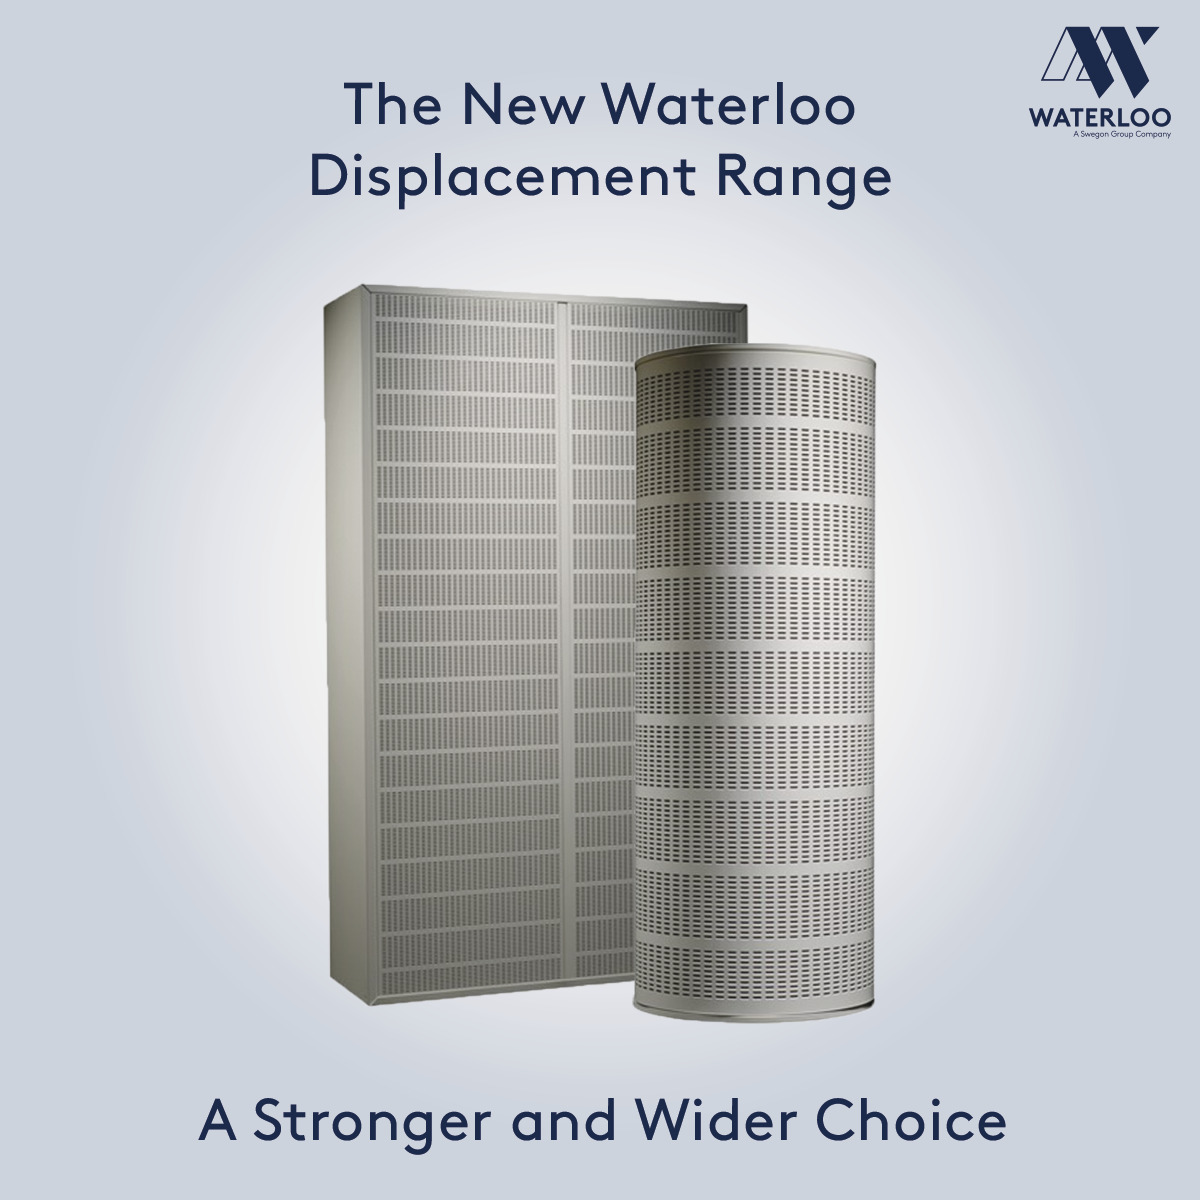 Waterloo Strengthen Product Offering with Displacement 